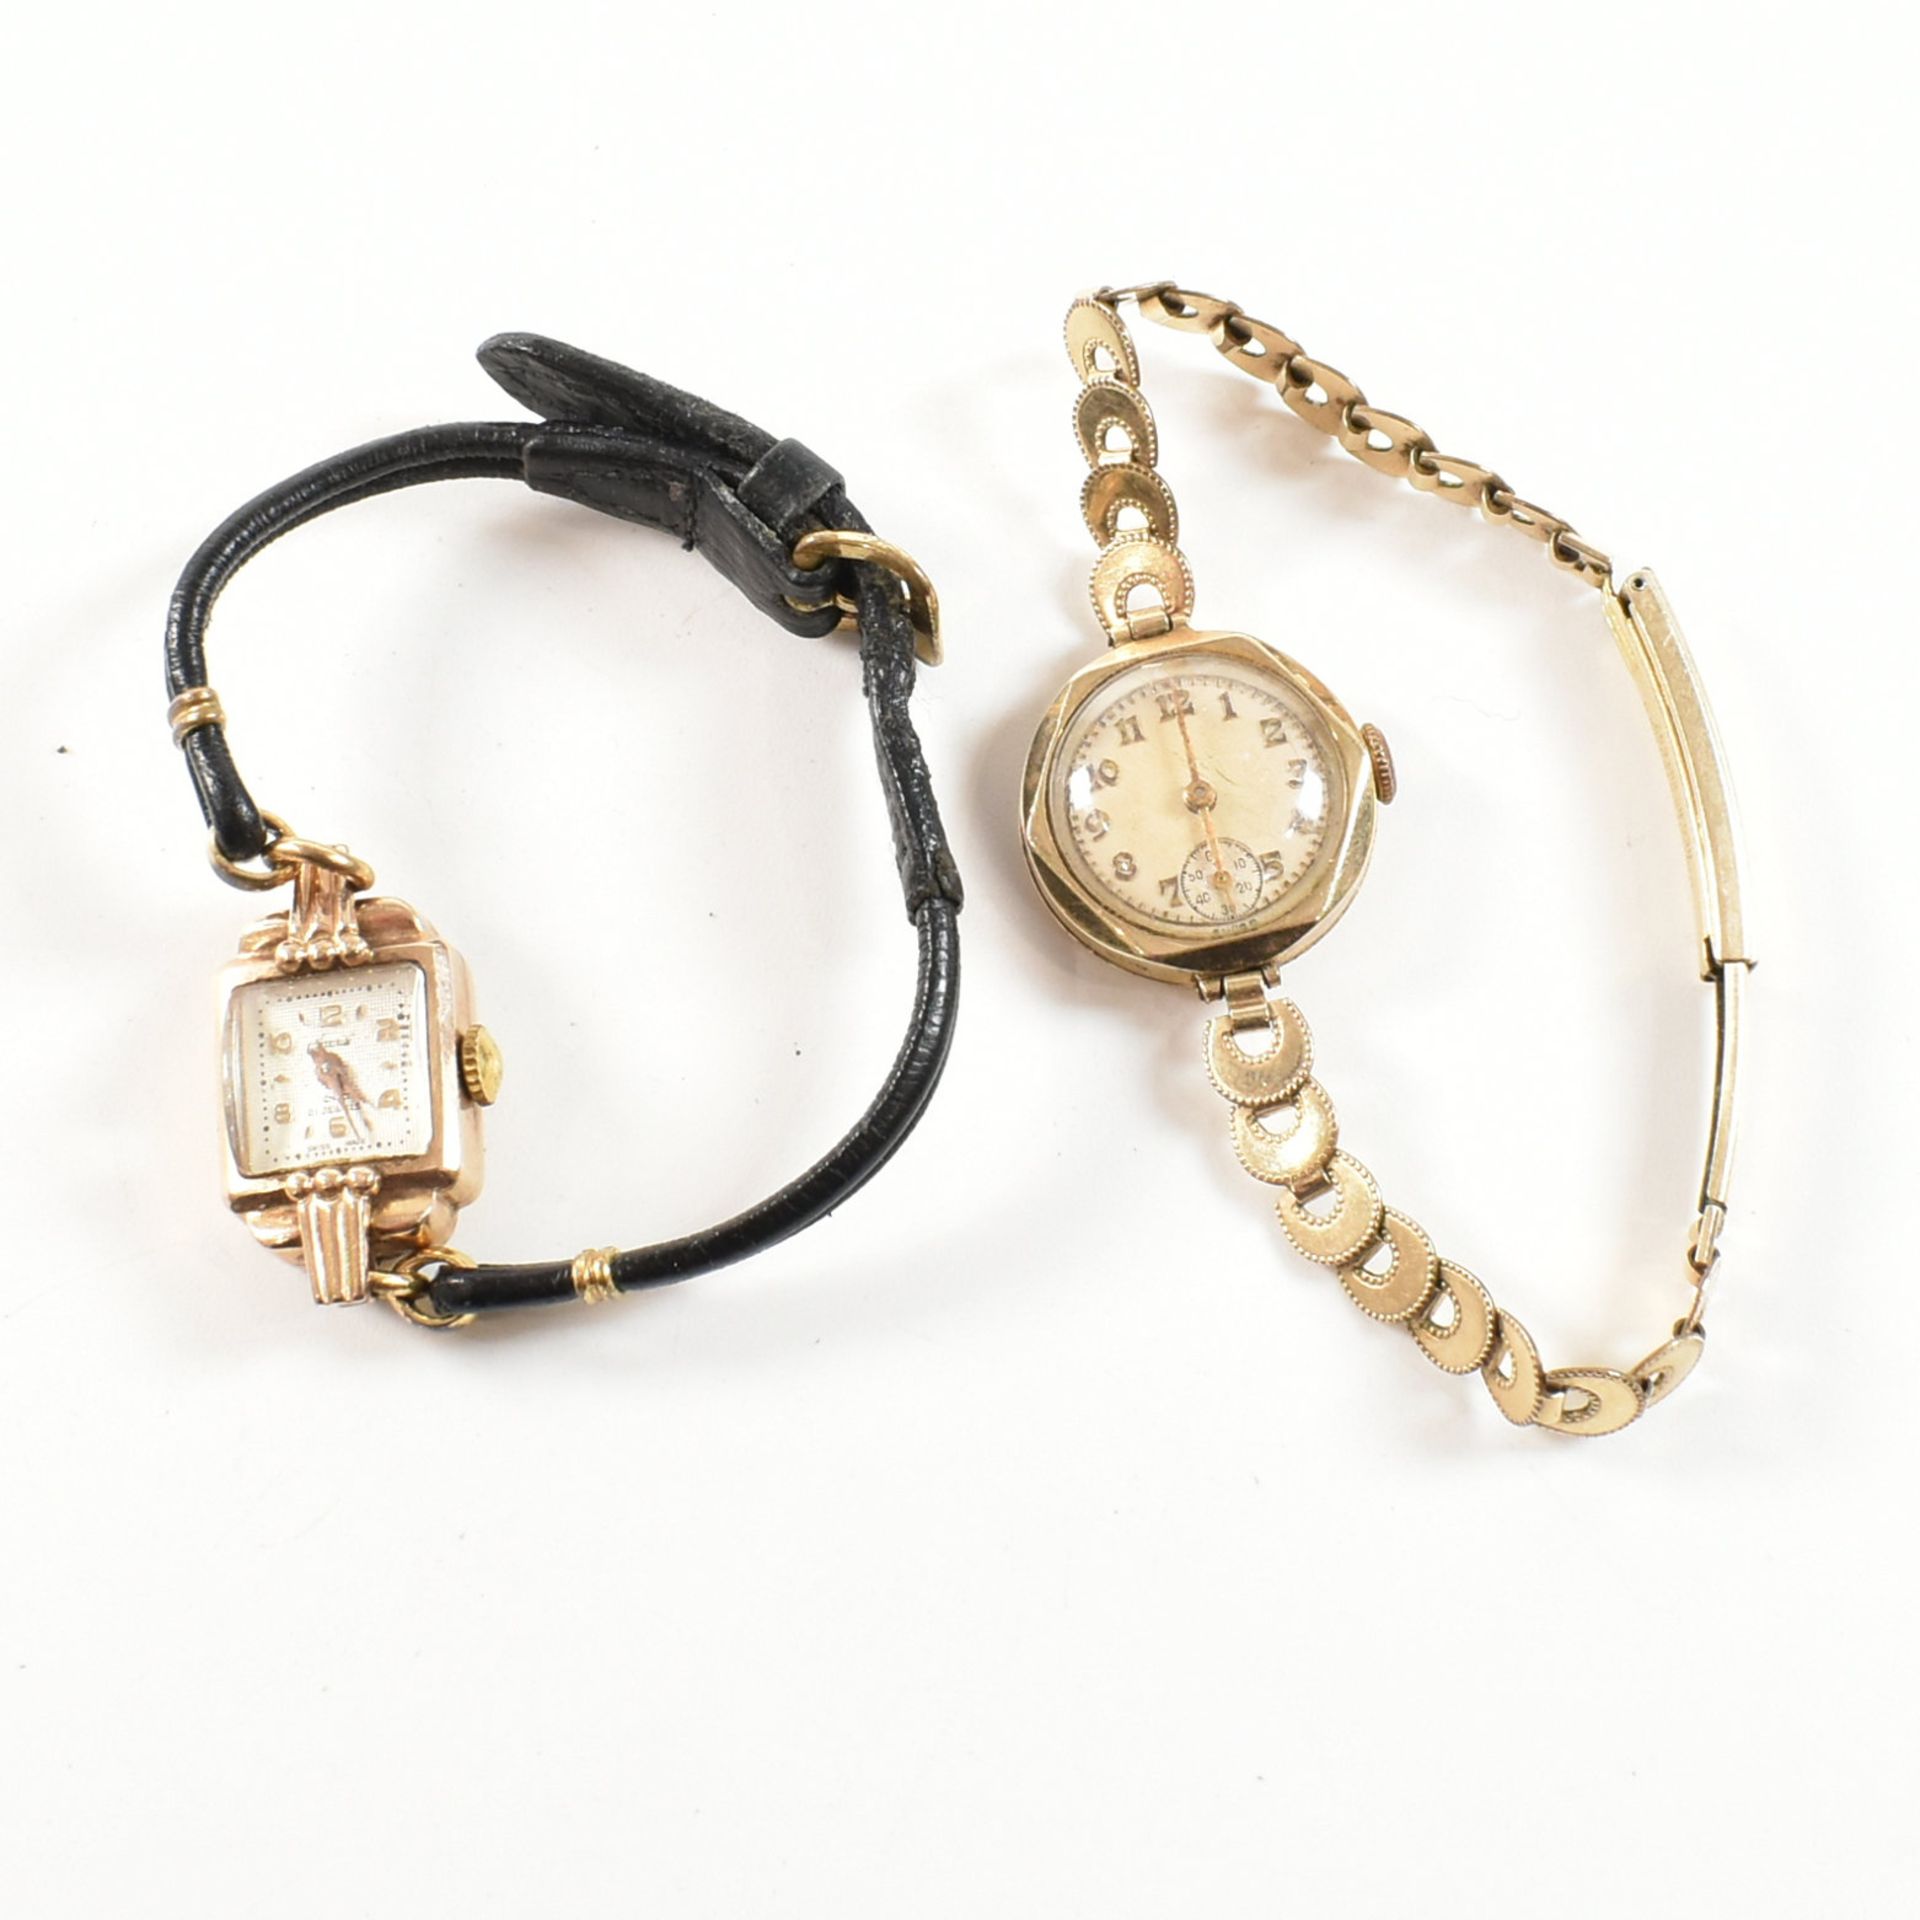 9CT GOLD ACCURIST DRESS WATCH & ANOTHER - Image 4 of 4